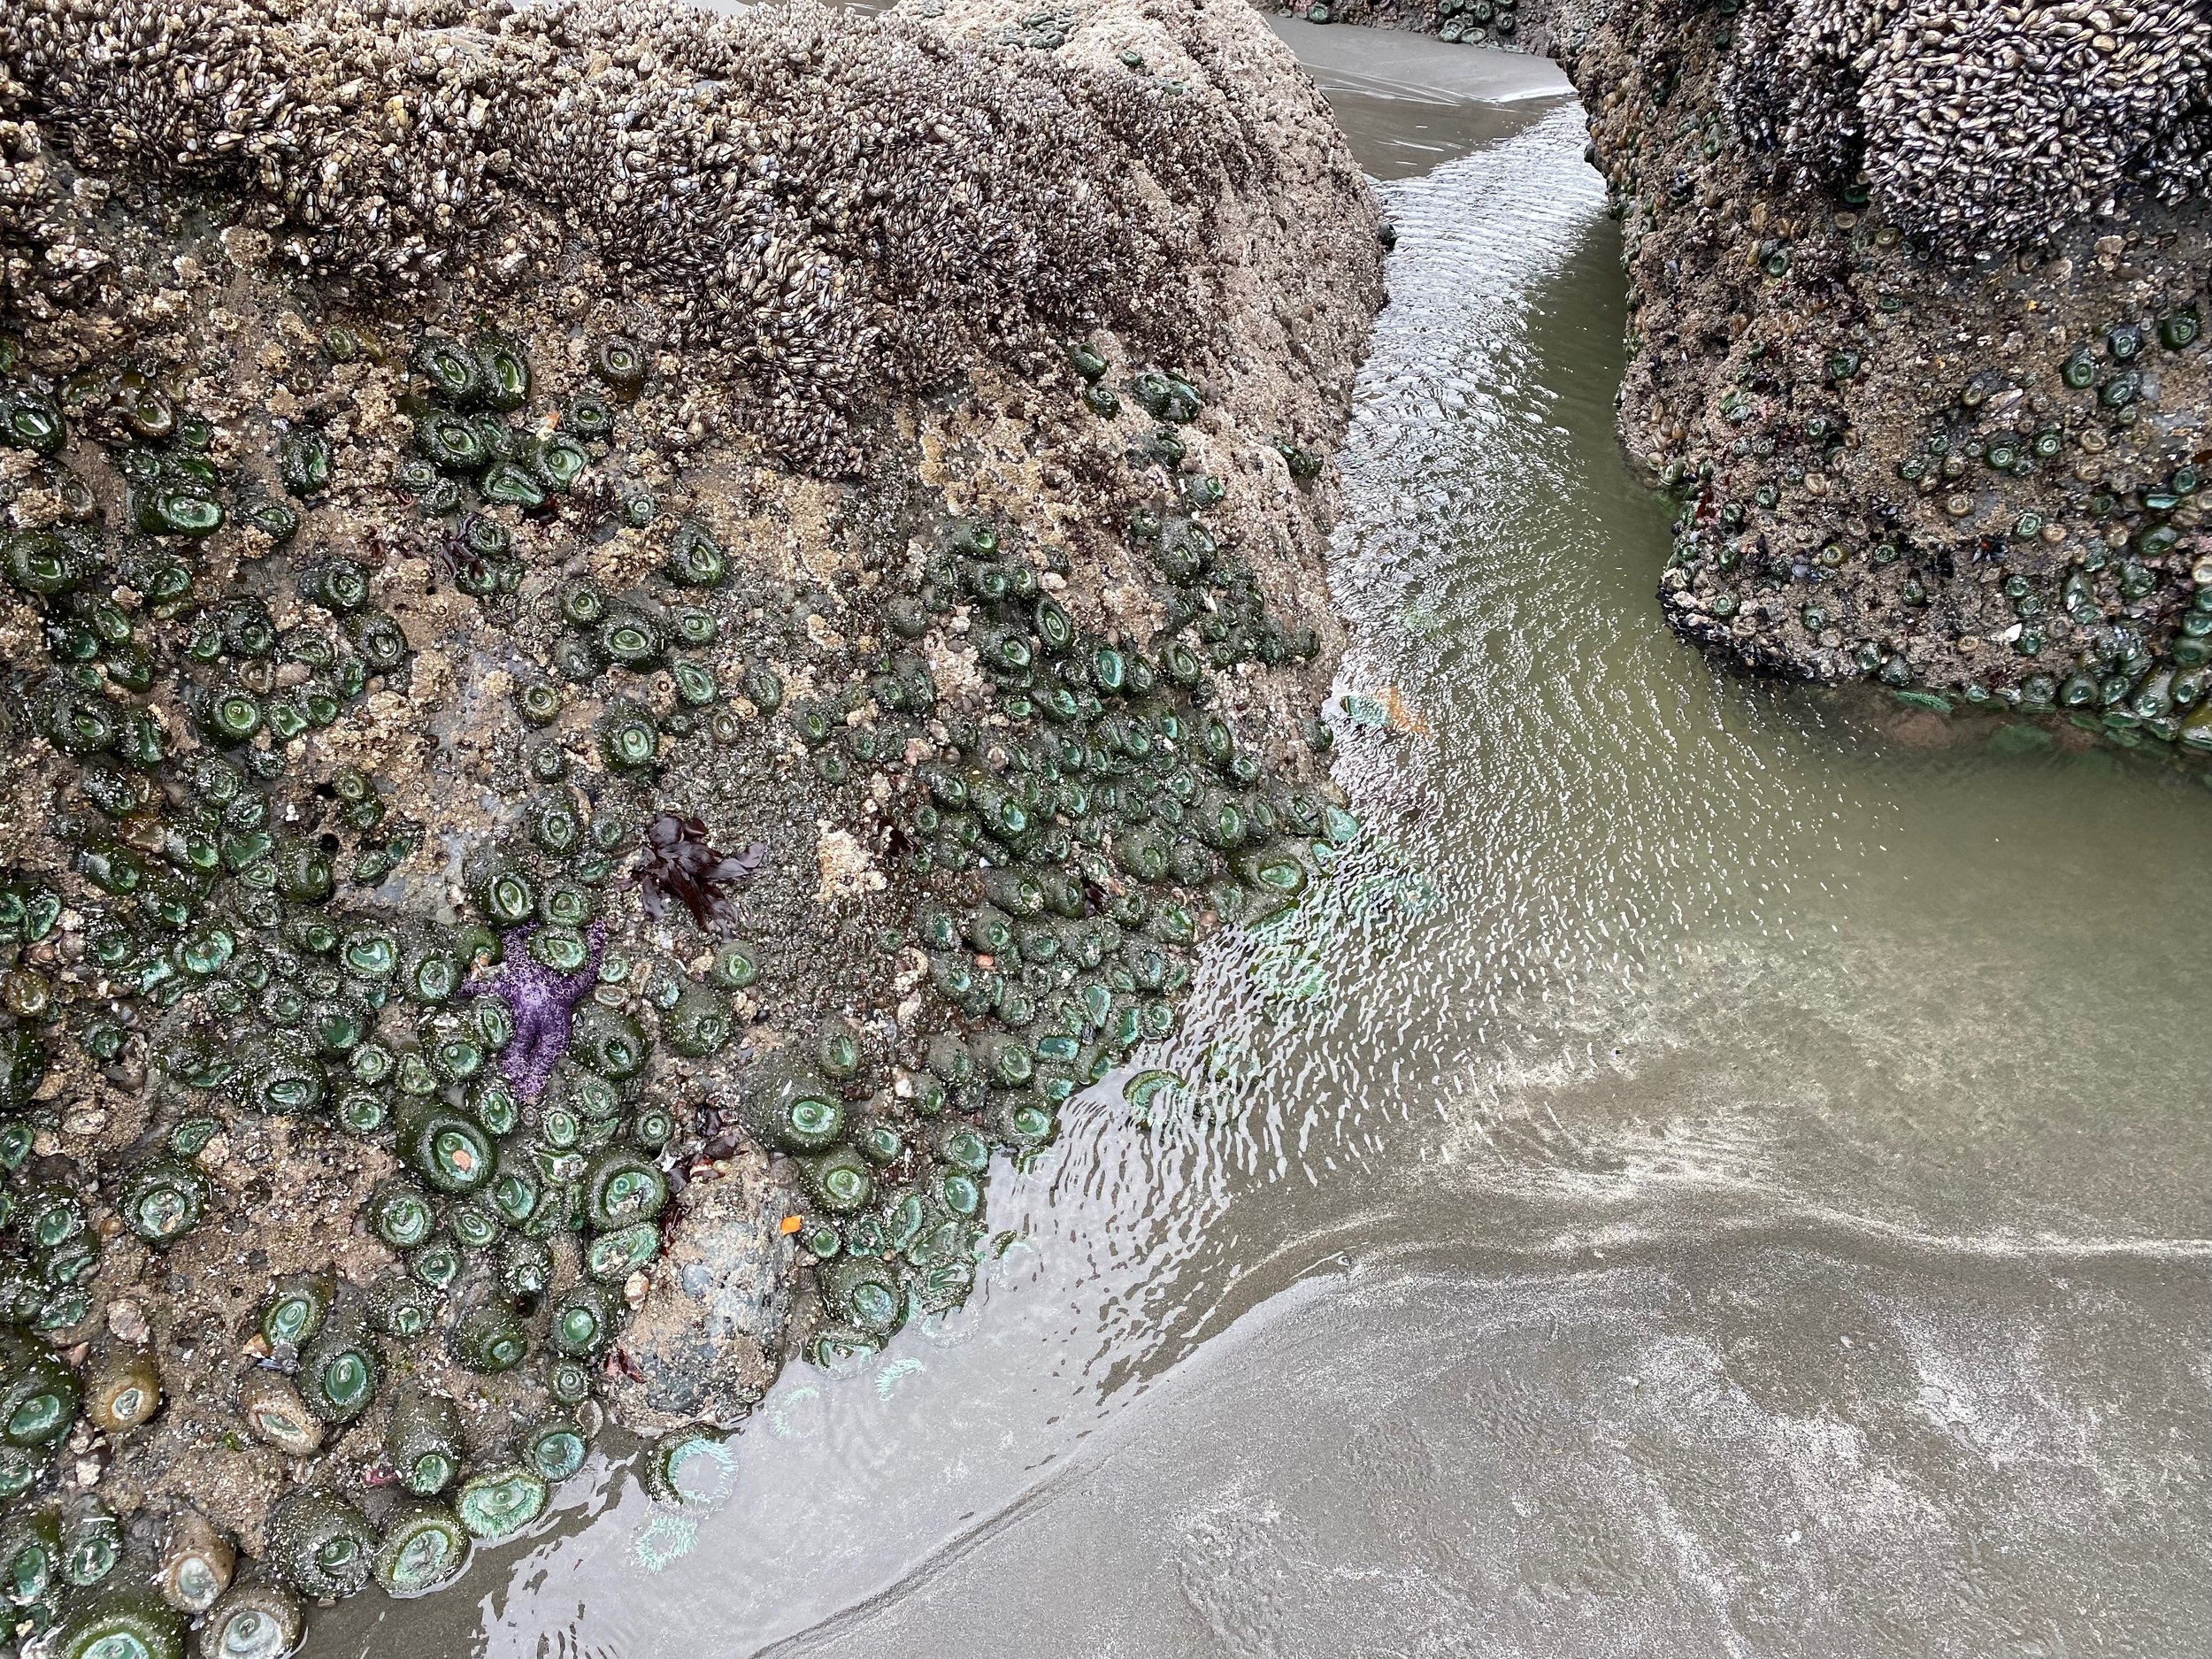 A tidepool  river navigates through walls of sea stars, anemones, and muscles